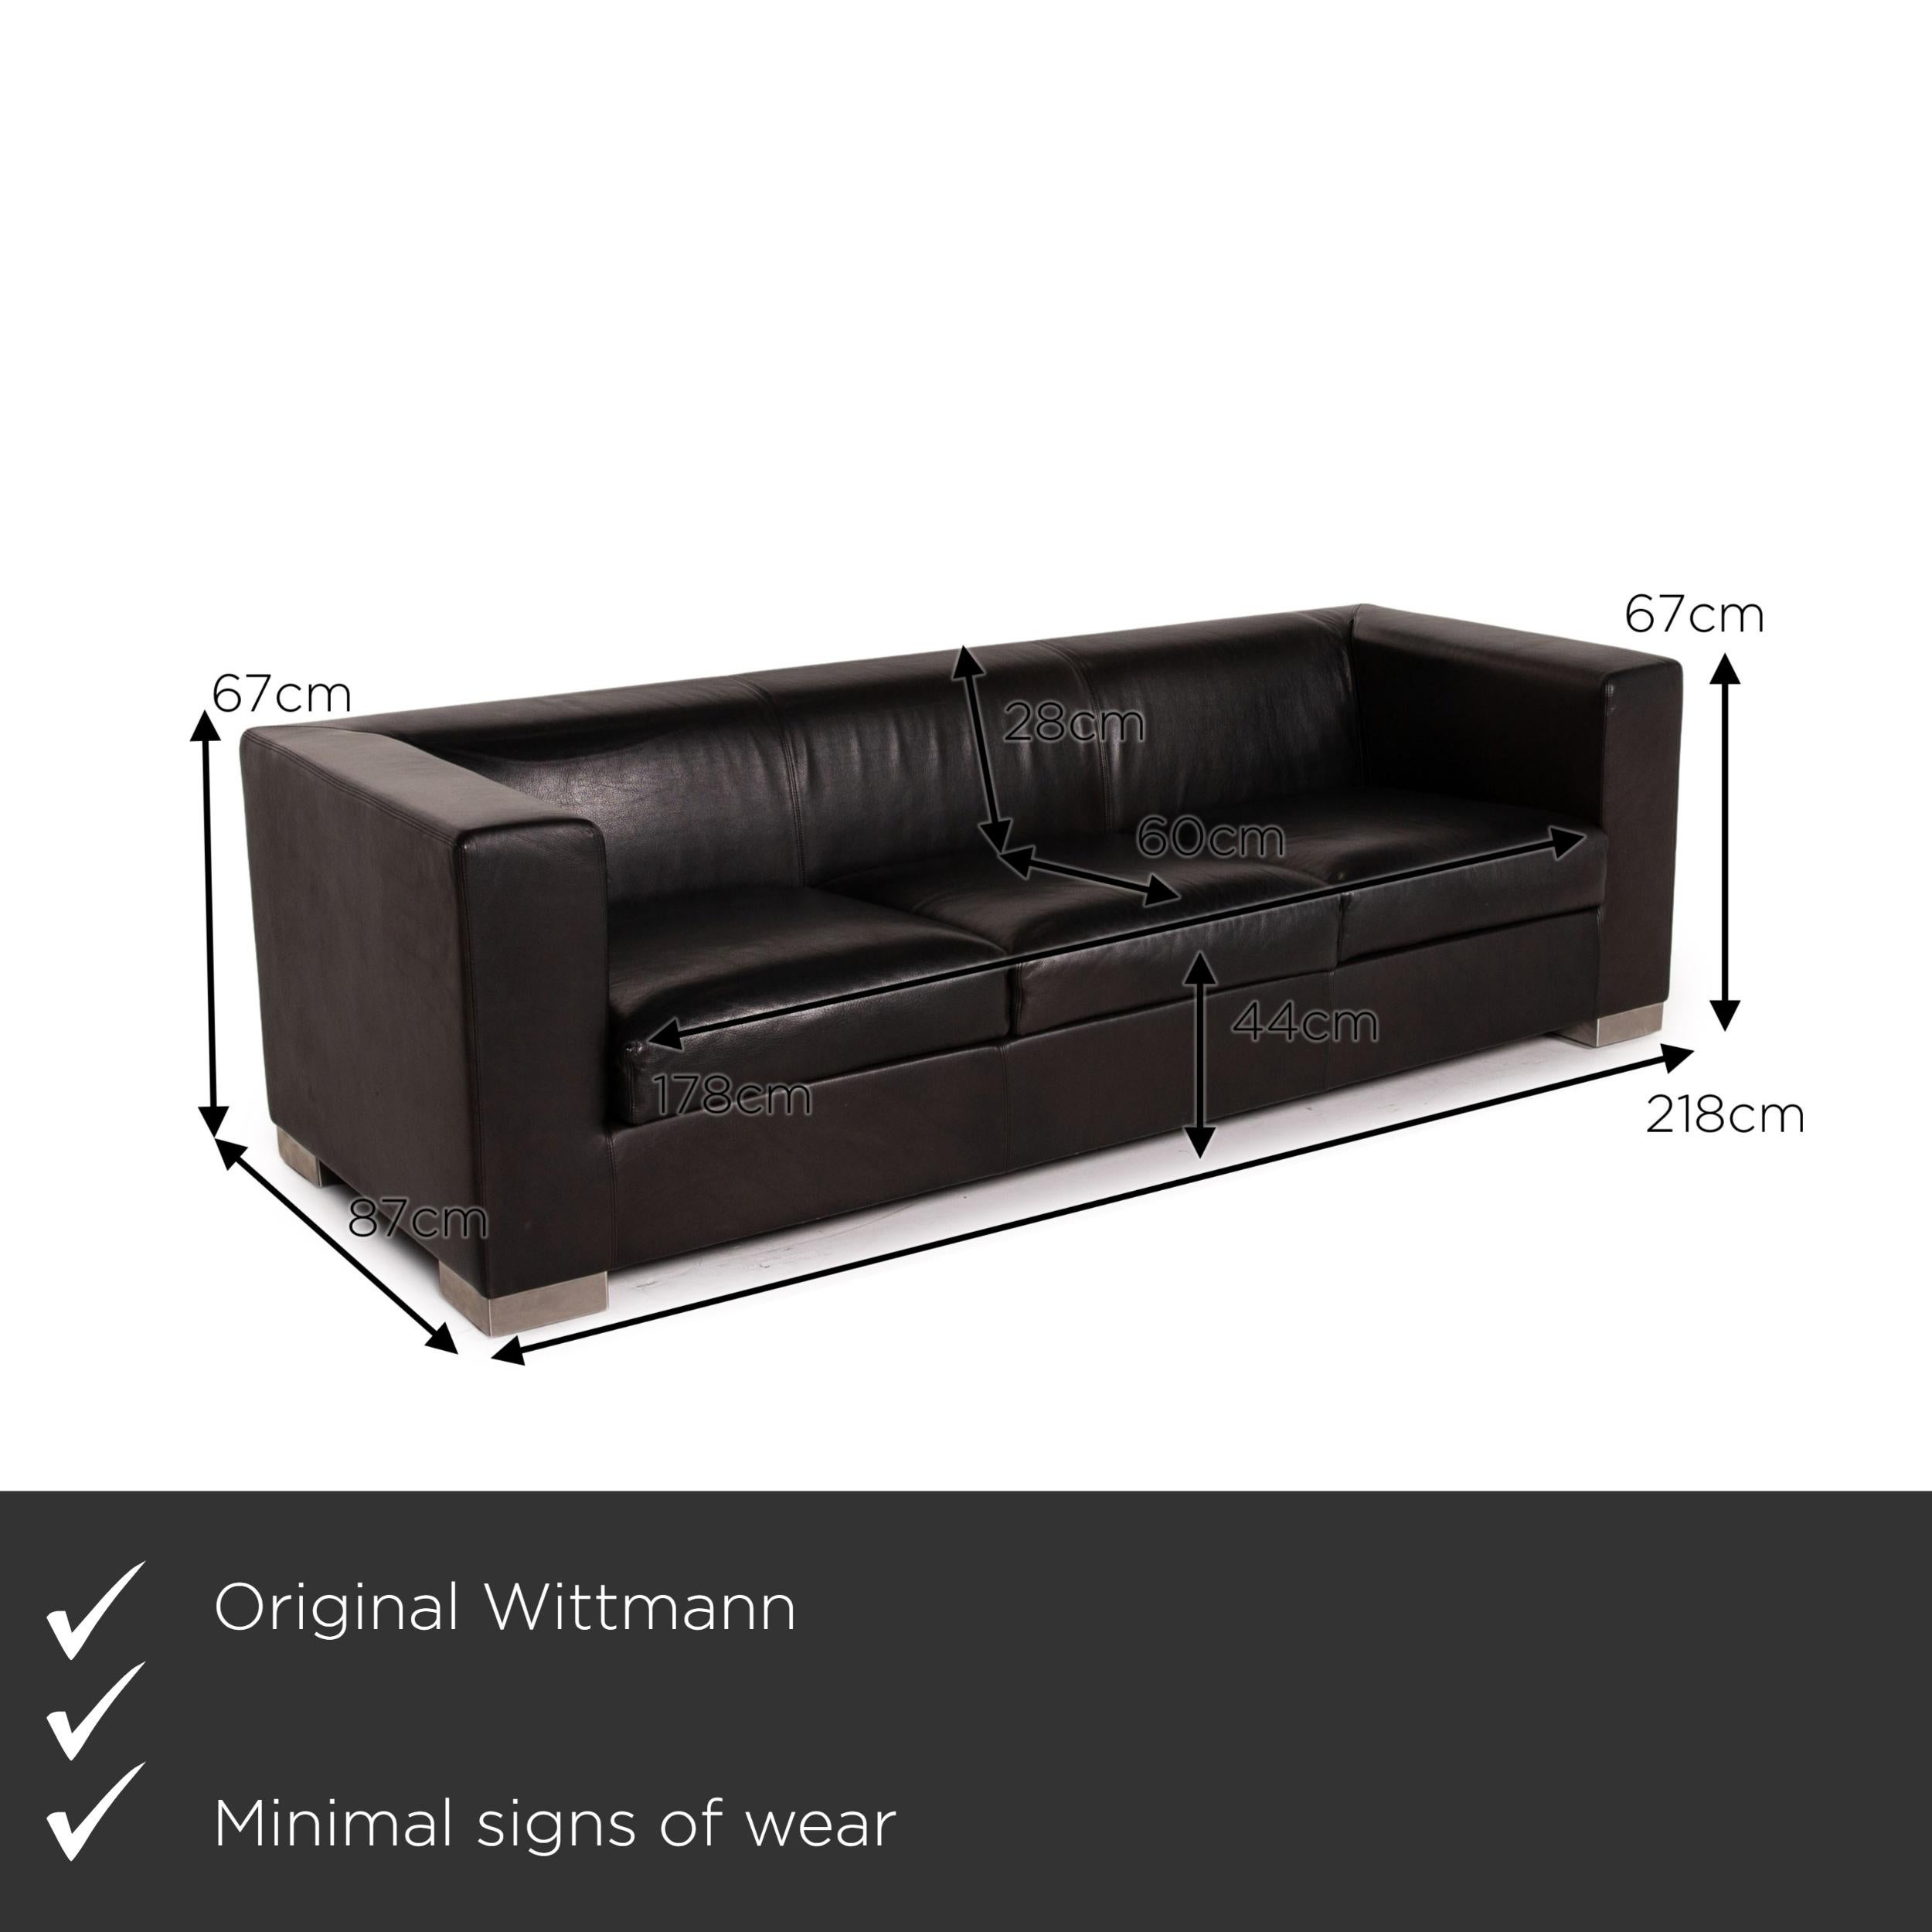 We present to you a Wittmann Camin leather sofa black three-seater couch.


 Product measurements in centimeters:
 

Depth: 87
Width: 218
Height: 67
Seat height: 44
Rest height: 67
Seat depth: 60
Seat width: 178
Back height: 28.
 